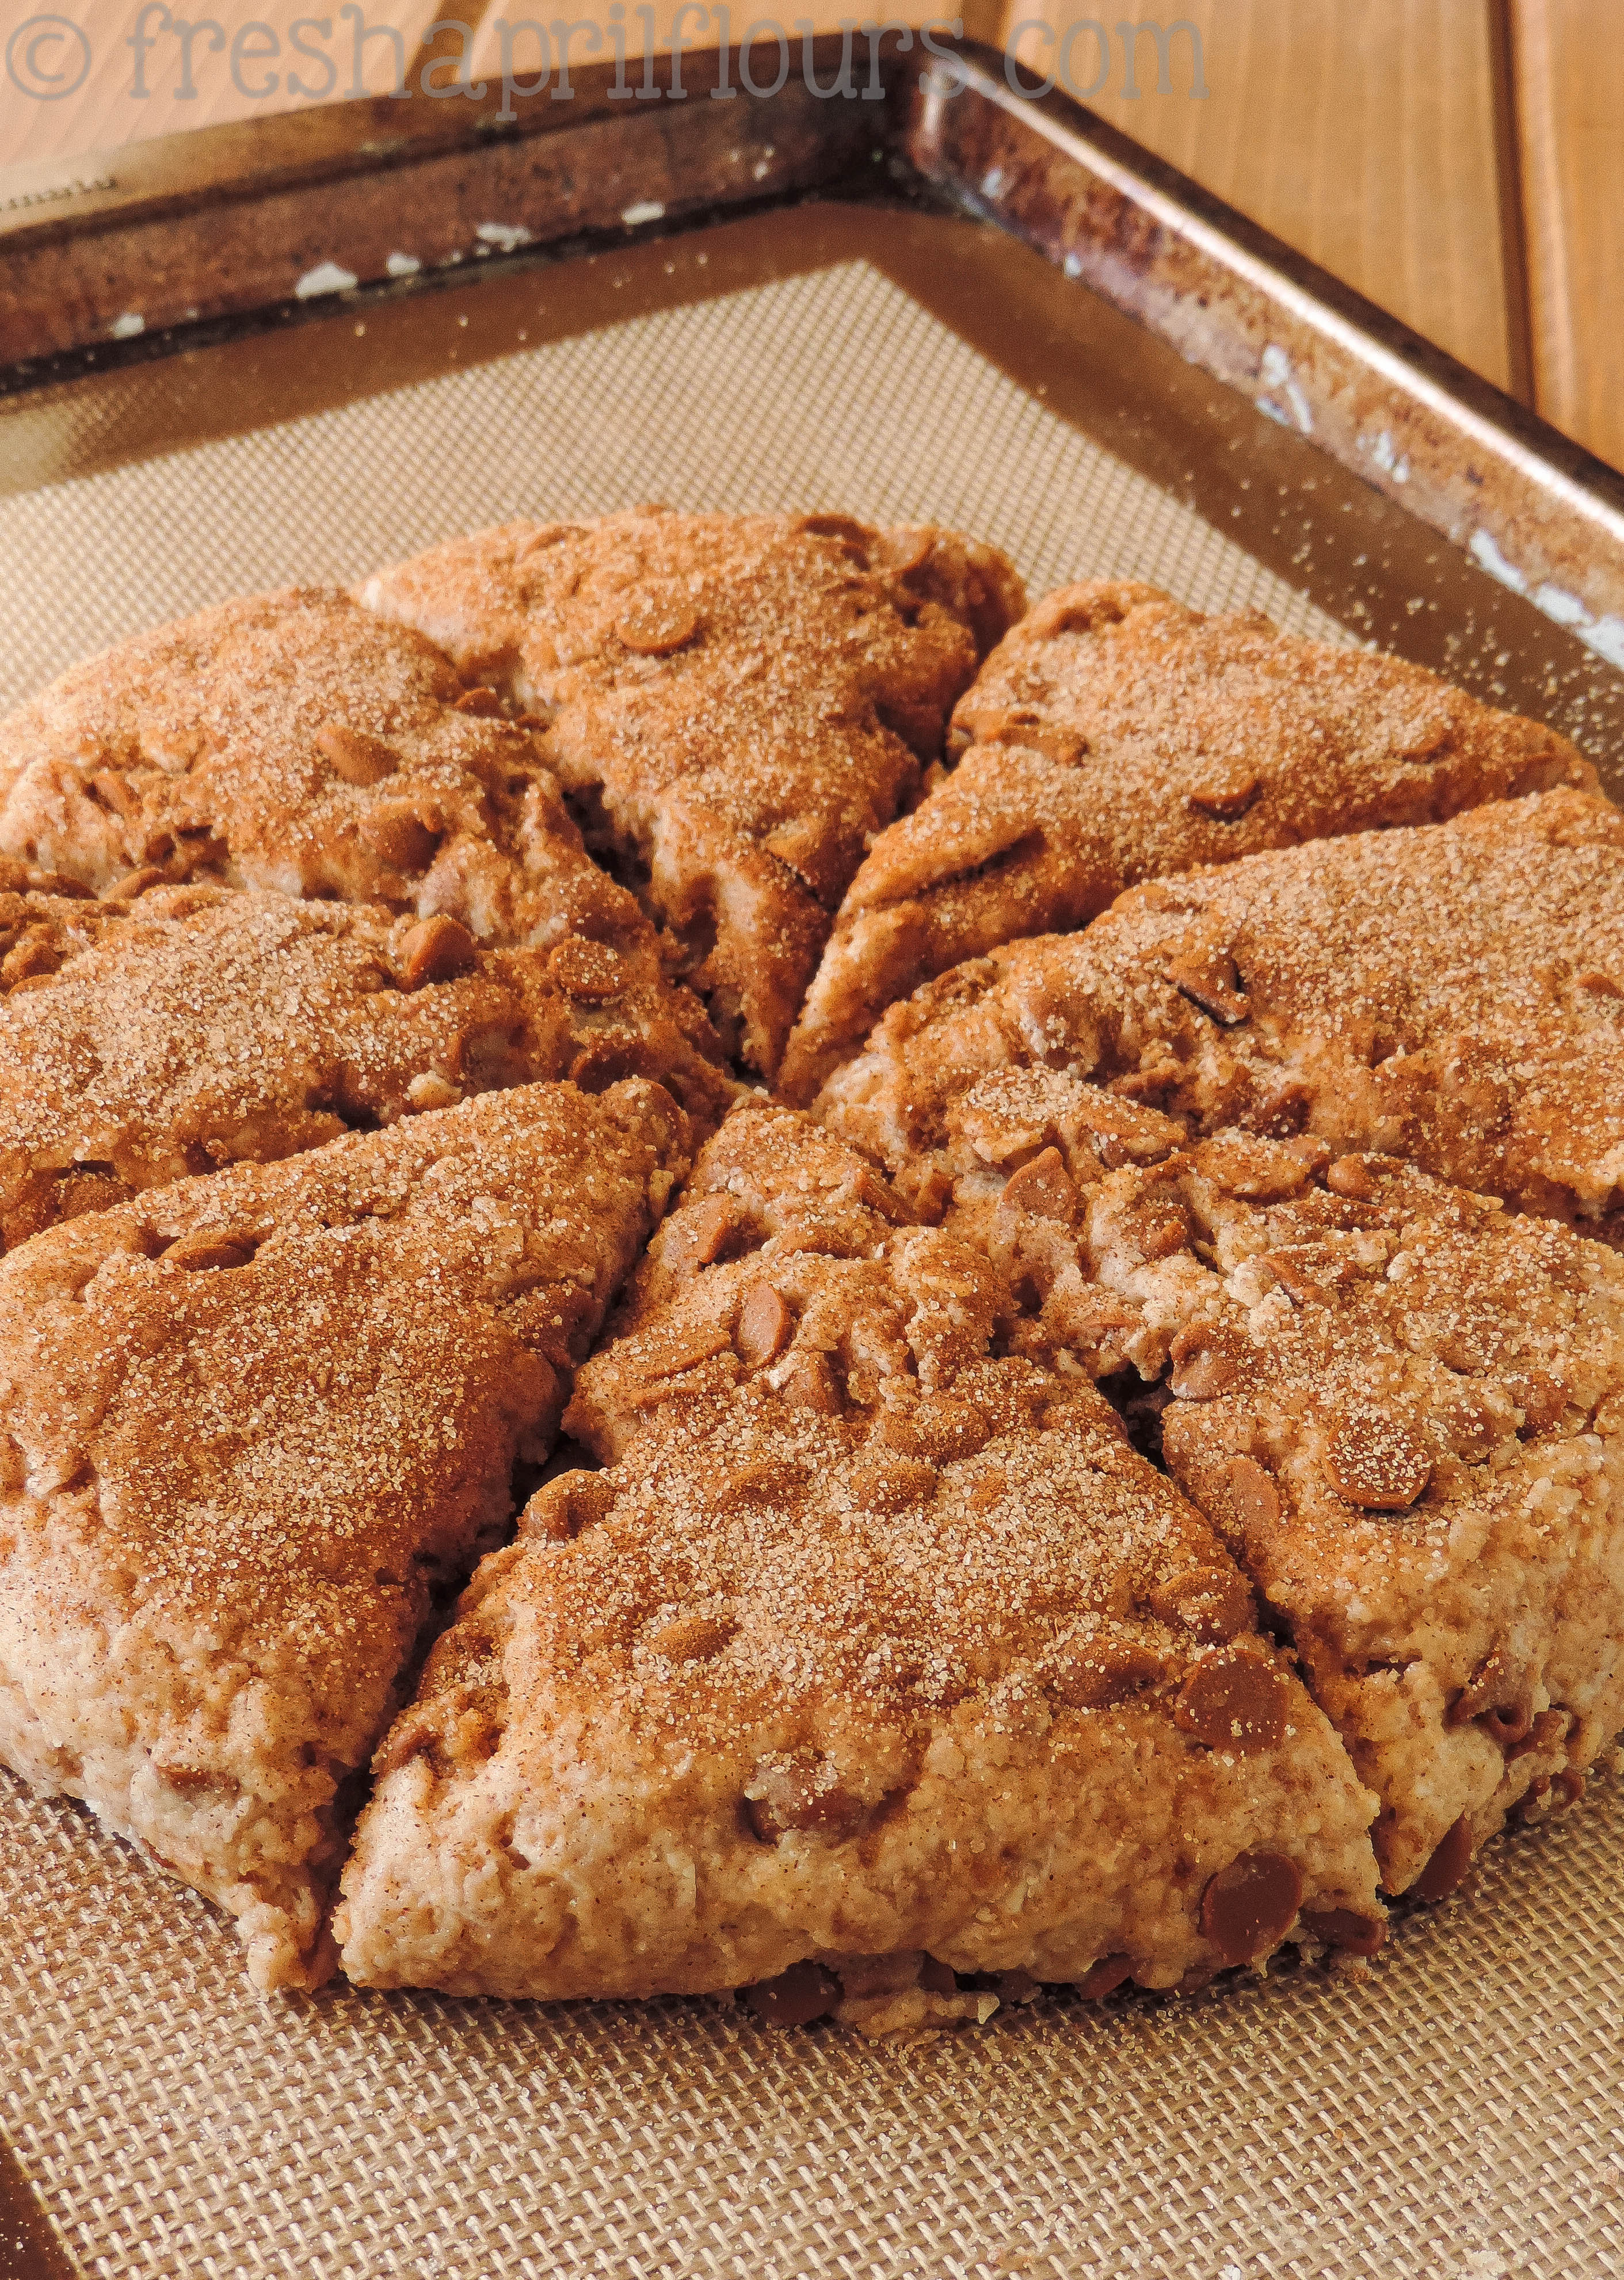 cinnamon crunch scone dough sliced into portions and ready to bake